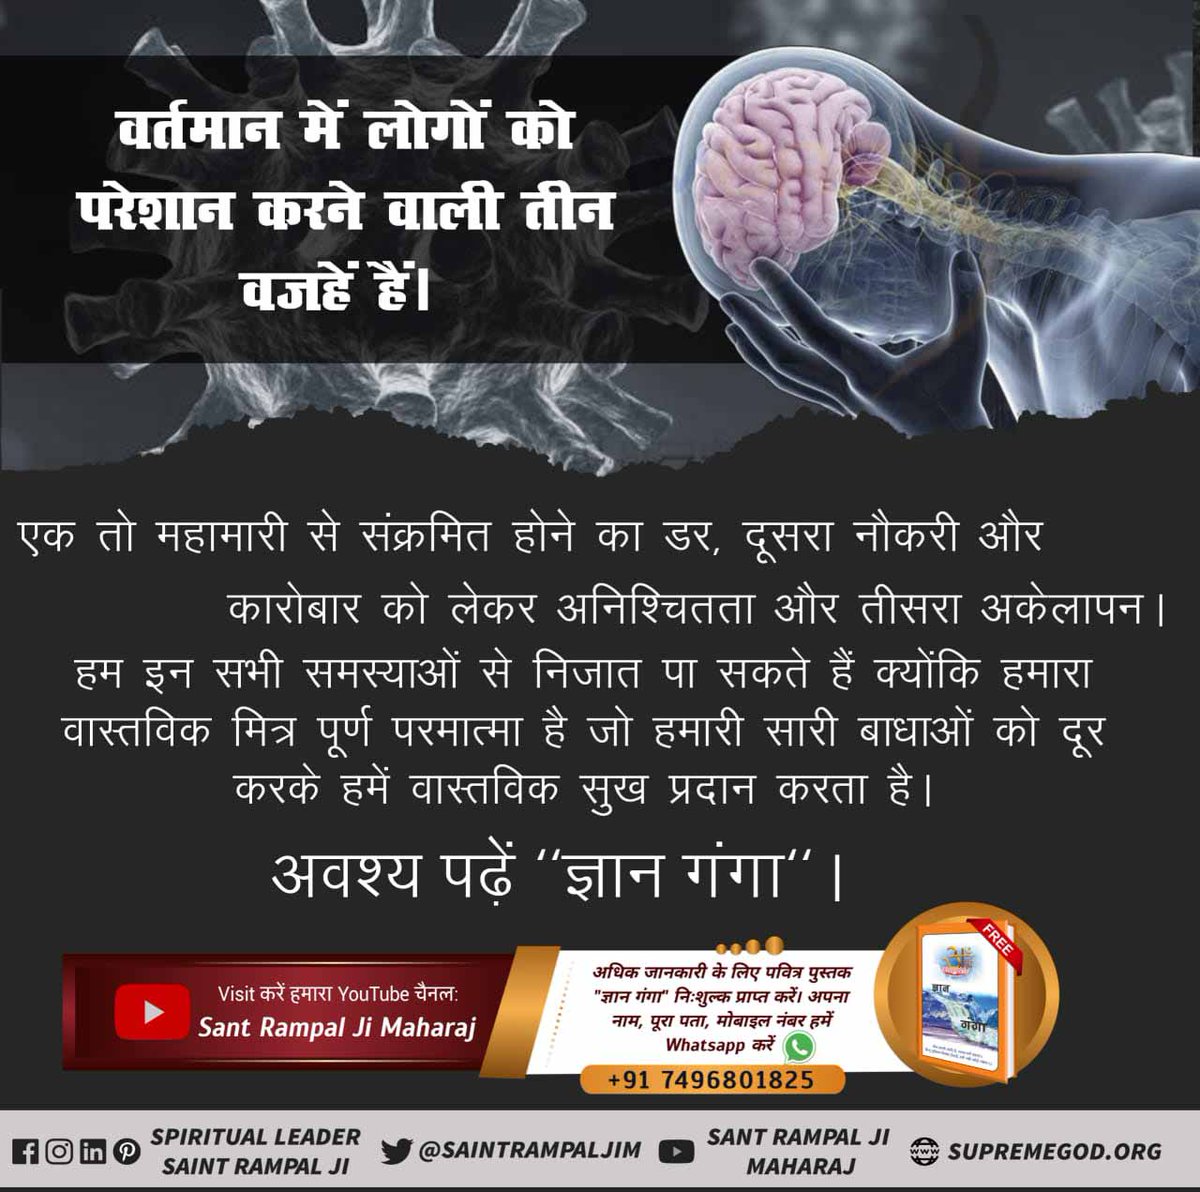 #मानसिक_शांति_नहींतो_कुछनहीं Any event can cause stress, which has a lasting effect on a person's life. Like marriage, retirement or divorce. The solution to all stress situations is found in the company of the Perfect Guru. Therefore, come to the shelter of SantRampalJi Maharaj.